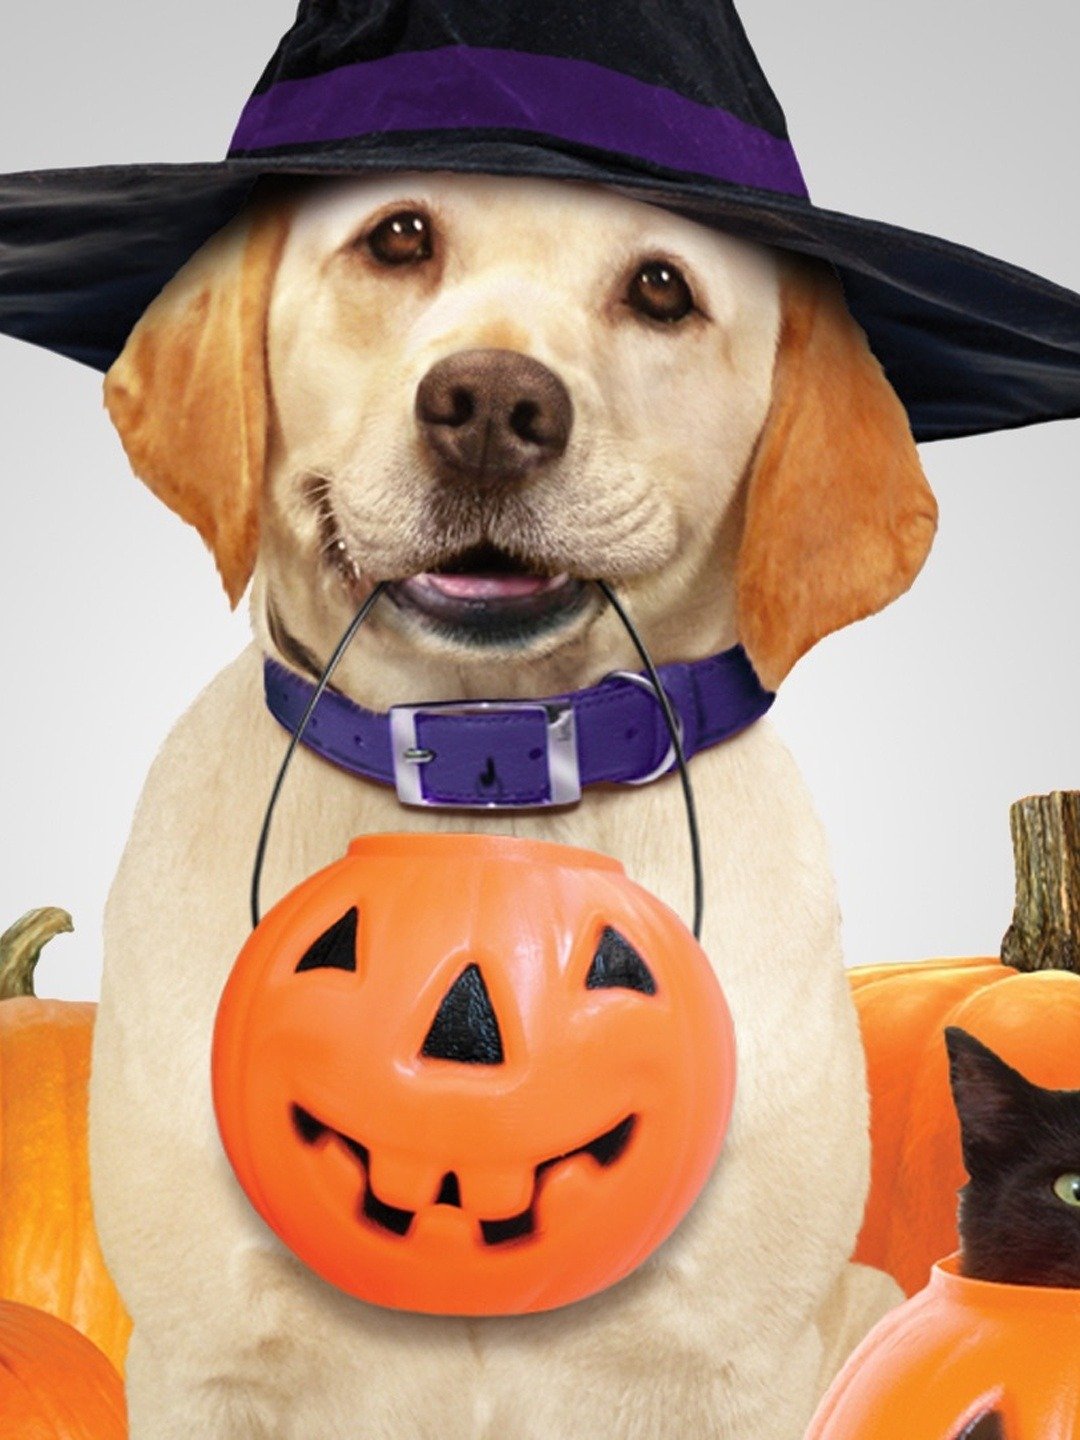 The Dog Who Saved Halloween - Rotten Tomatoes